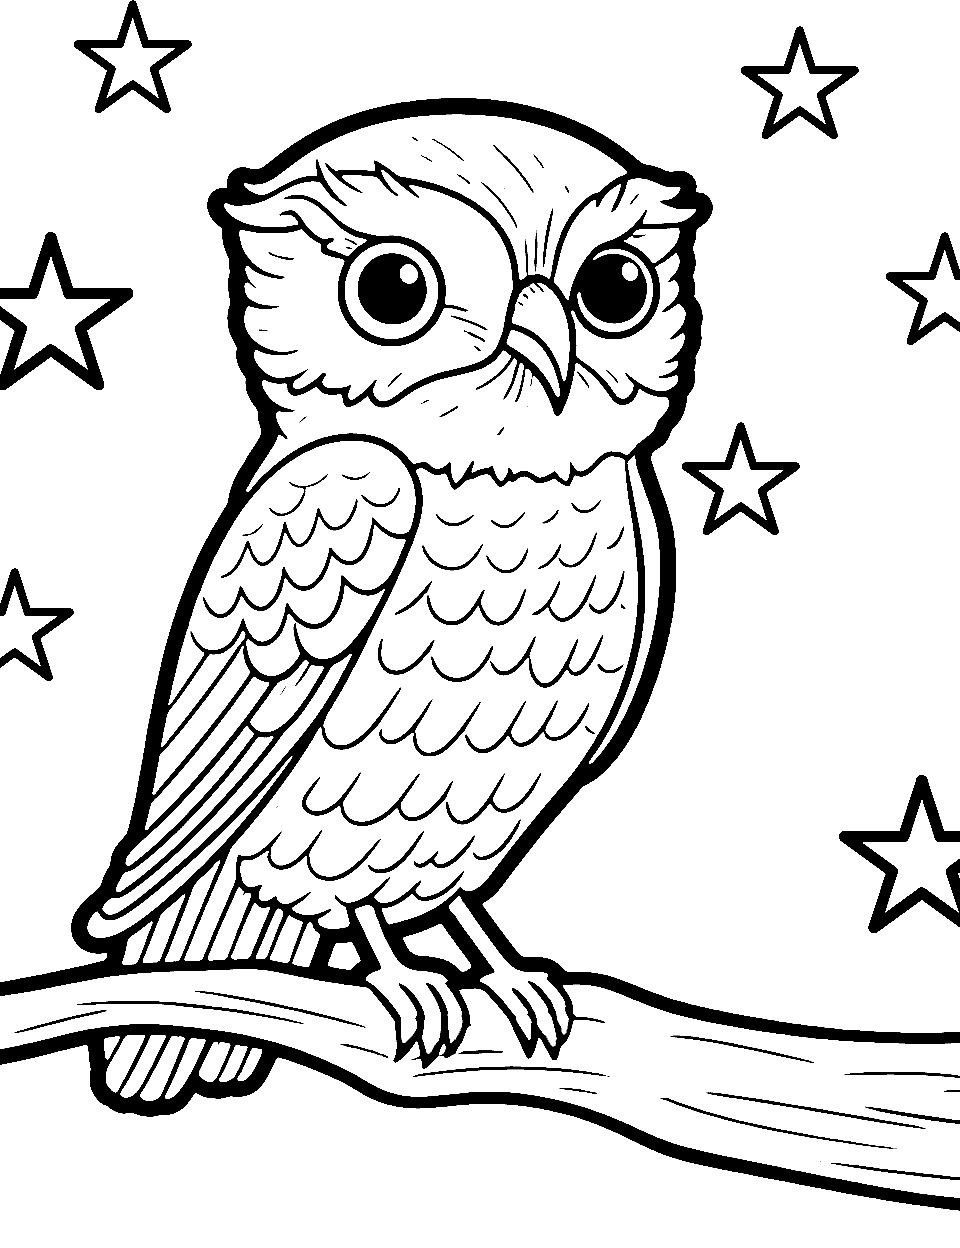 Owl's Midnight Vigil Coloring Page - An owl perched against a backdrop of a starry night.